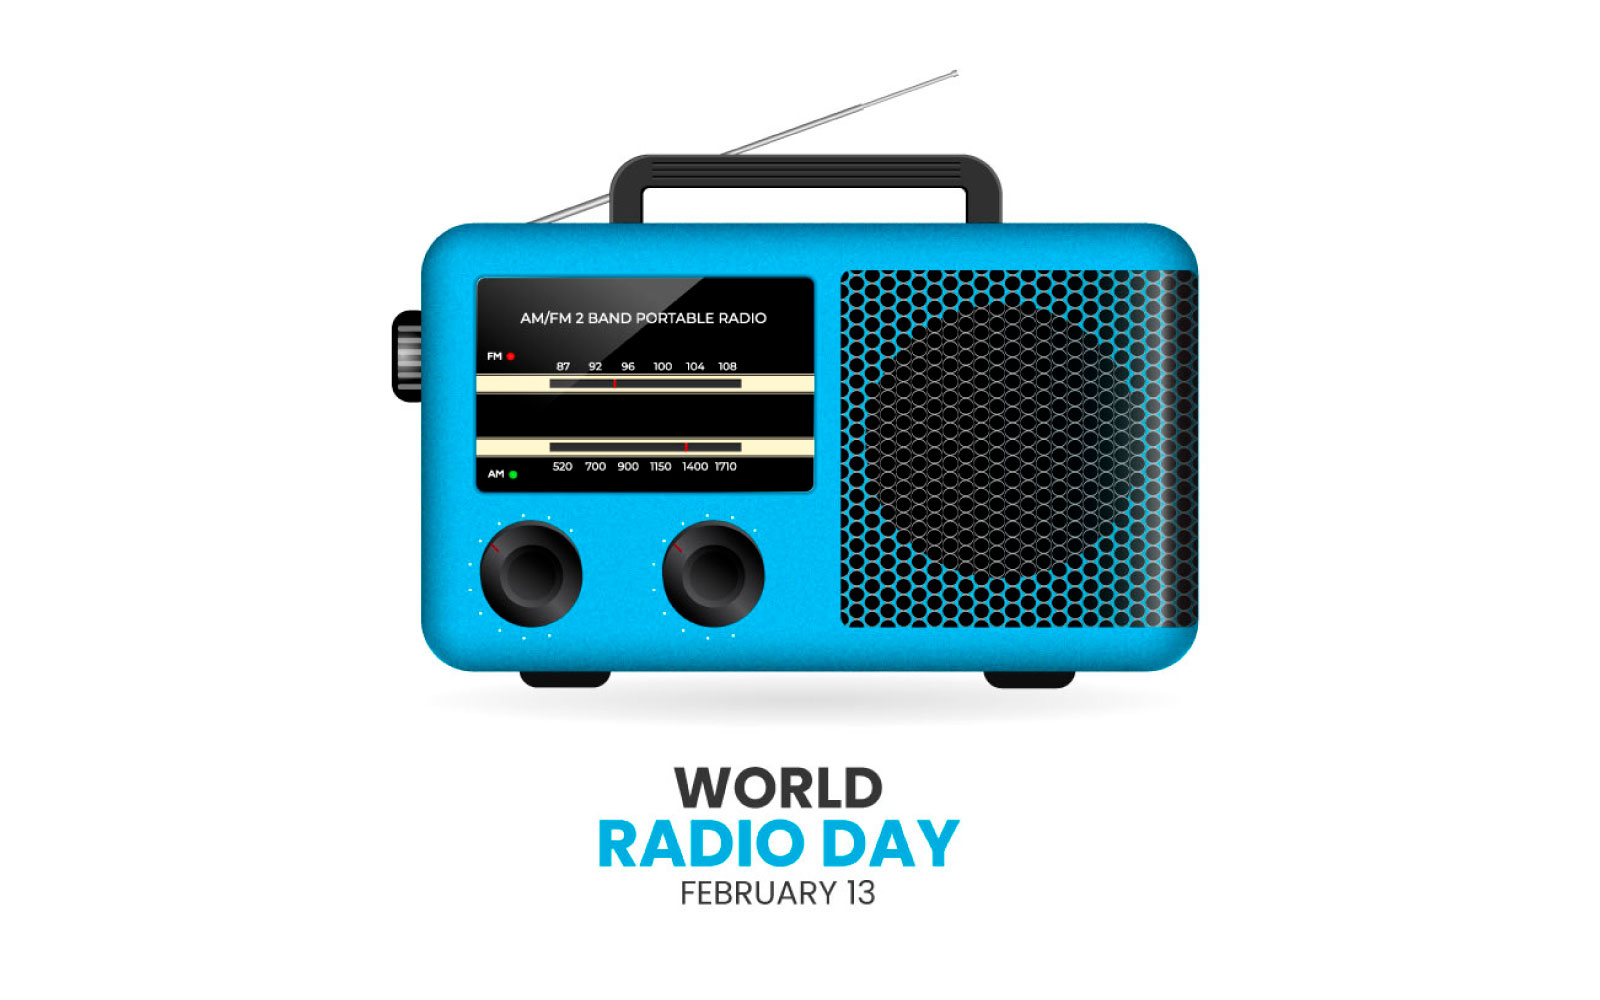 world radio day in a geometric style illustration concept